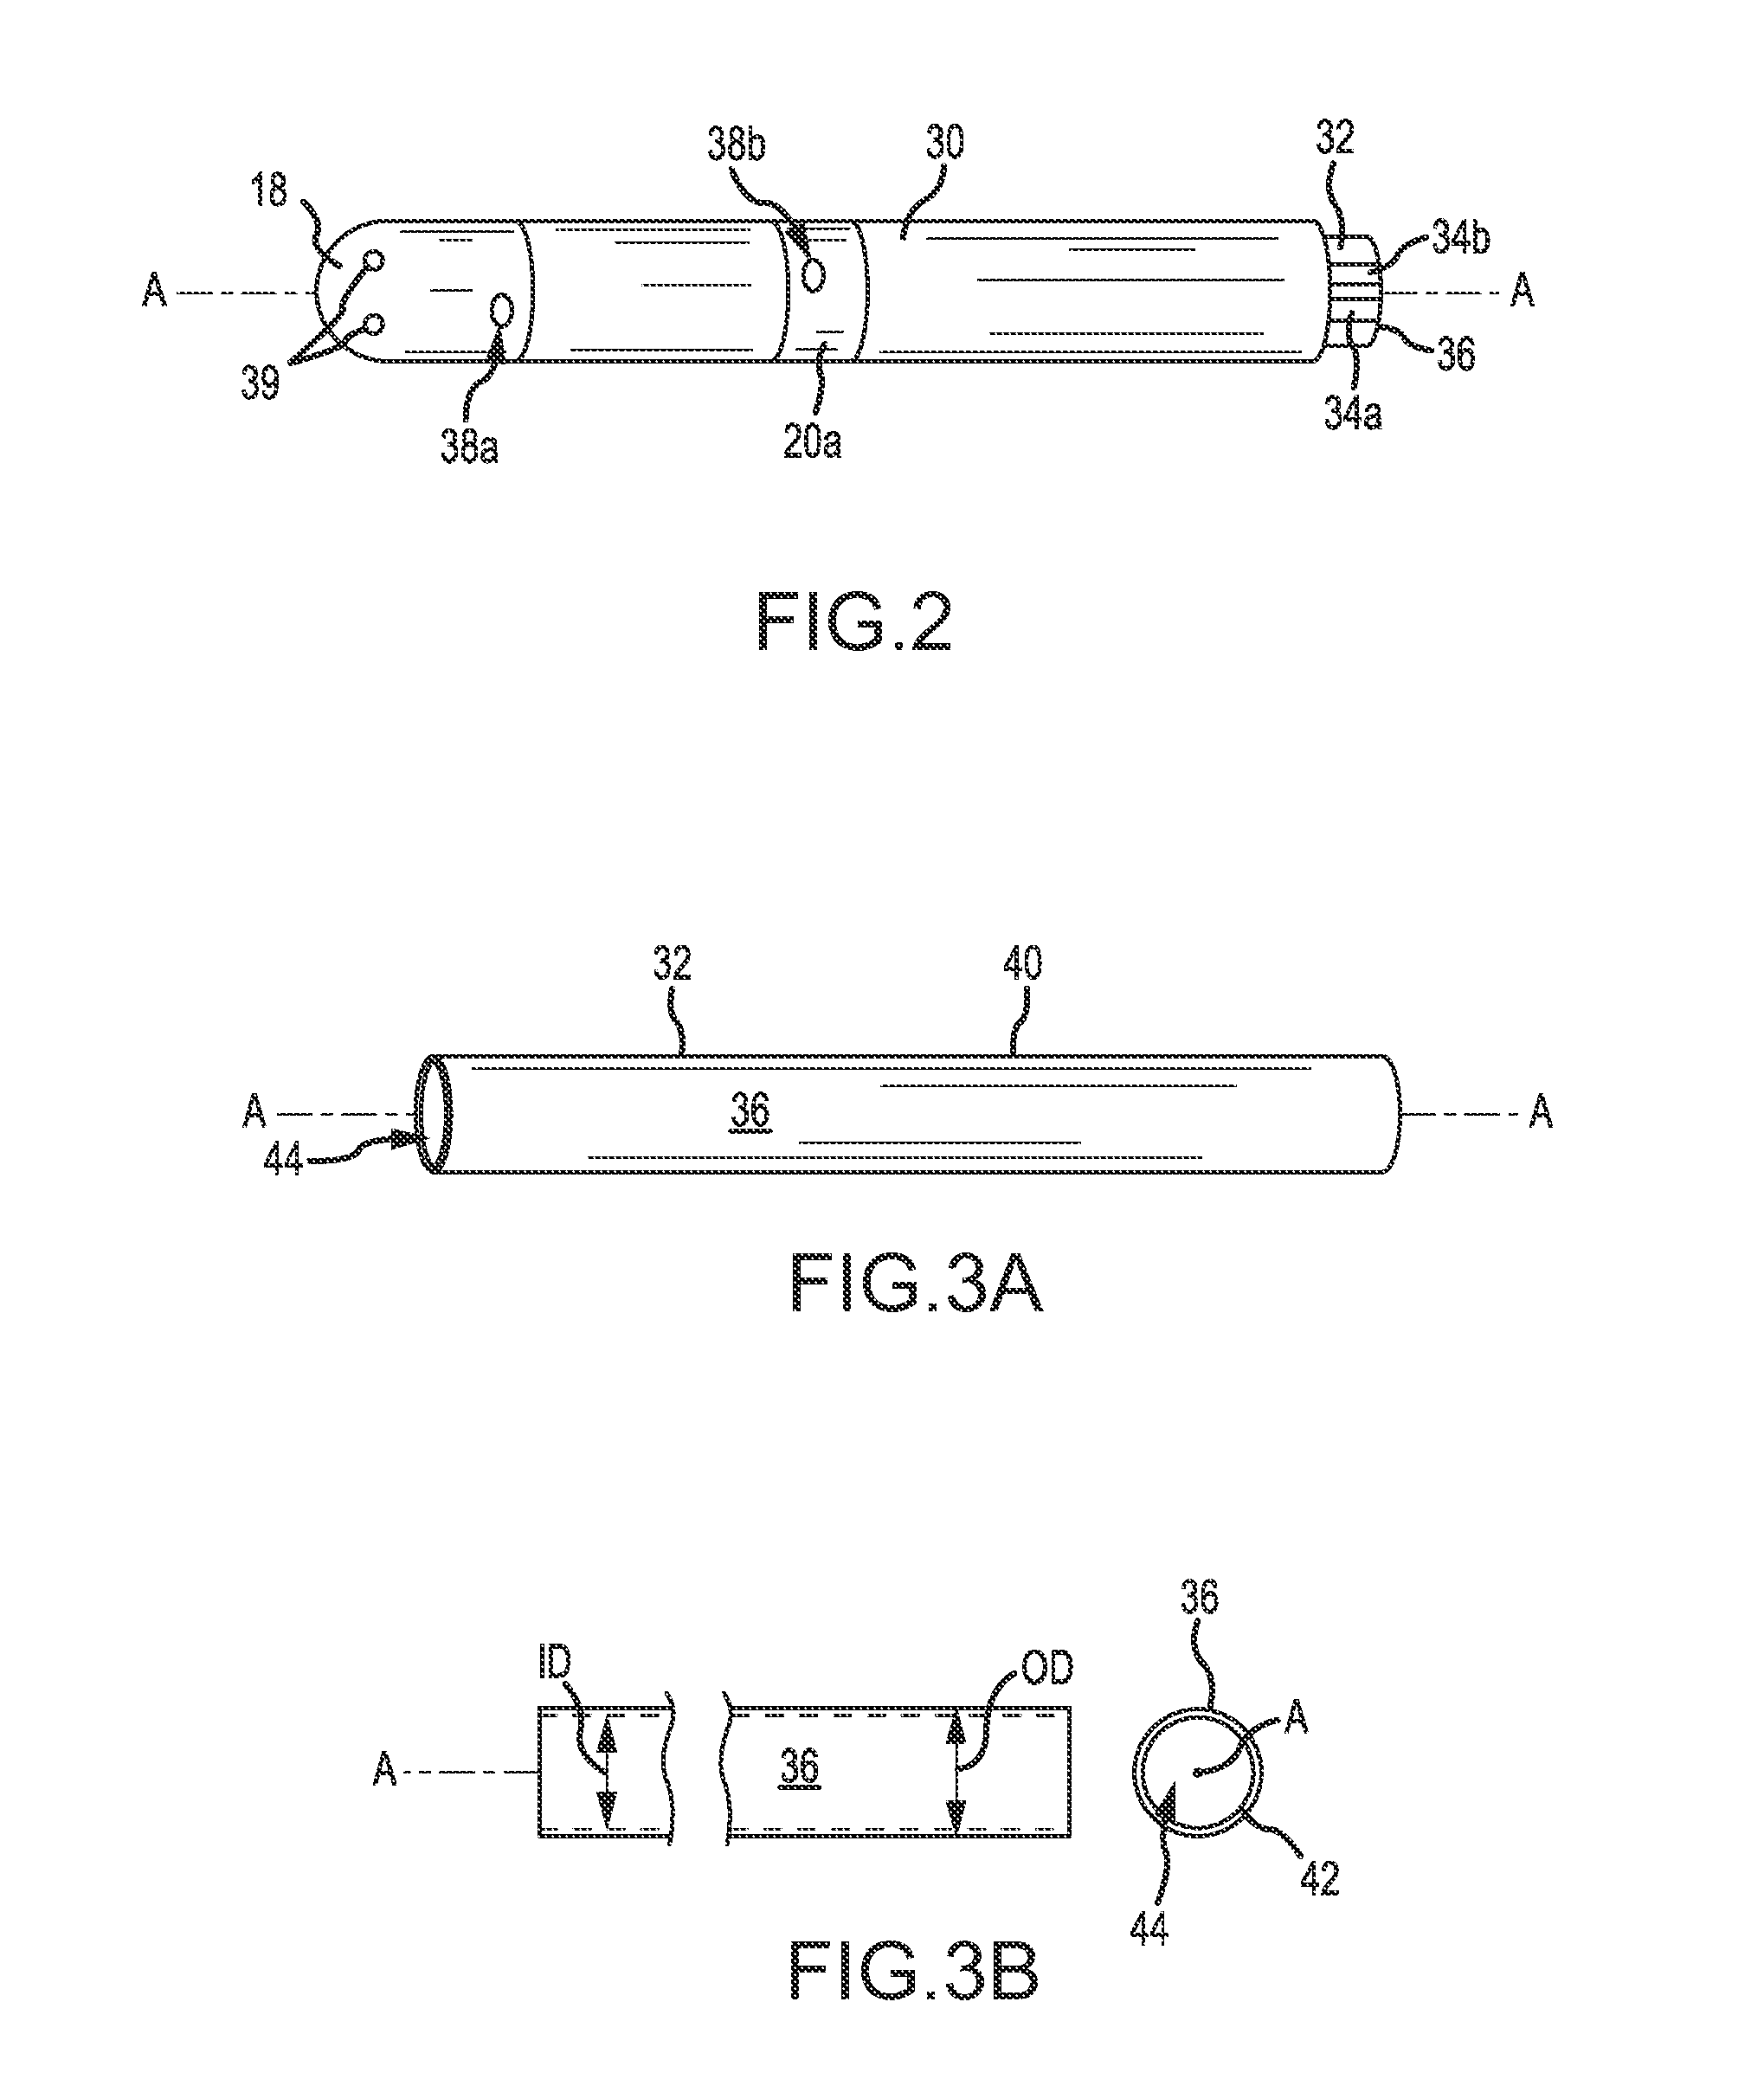 Elongate medical devices incorporating a flexible substrate, a sensor, and electrically-conductive traces